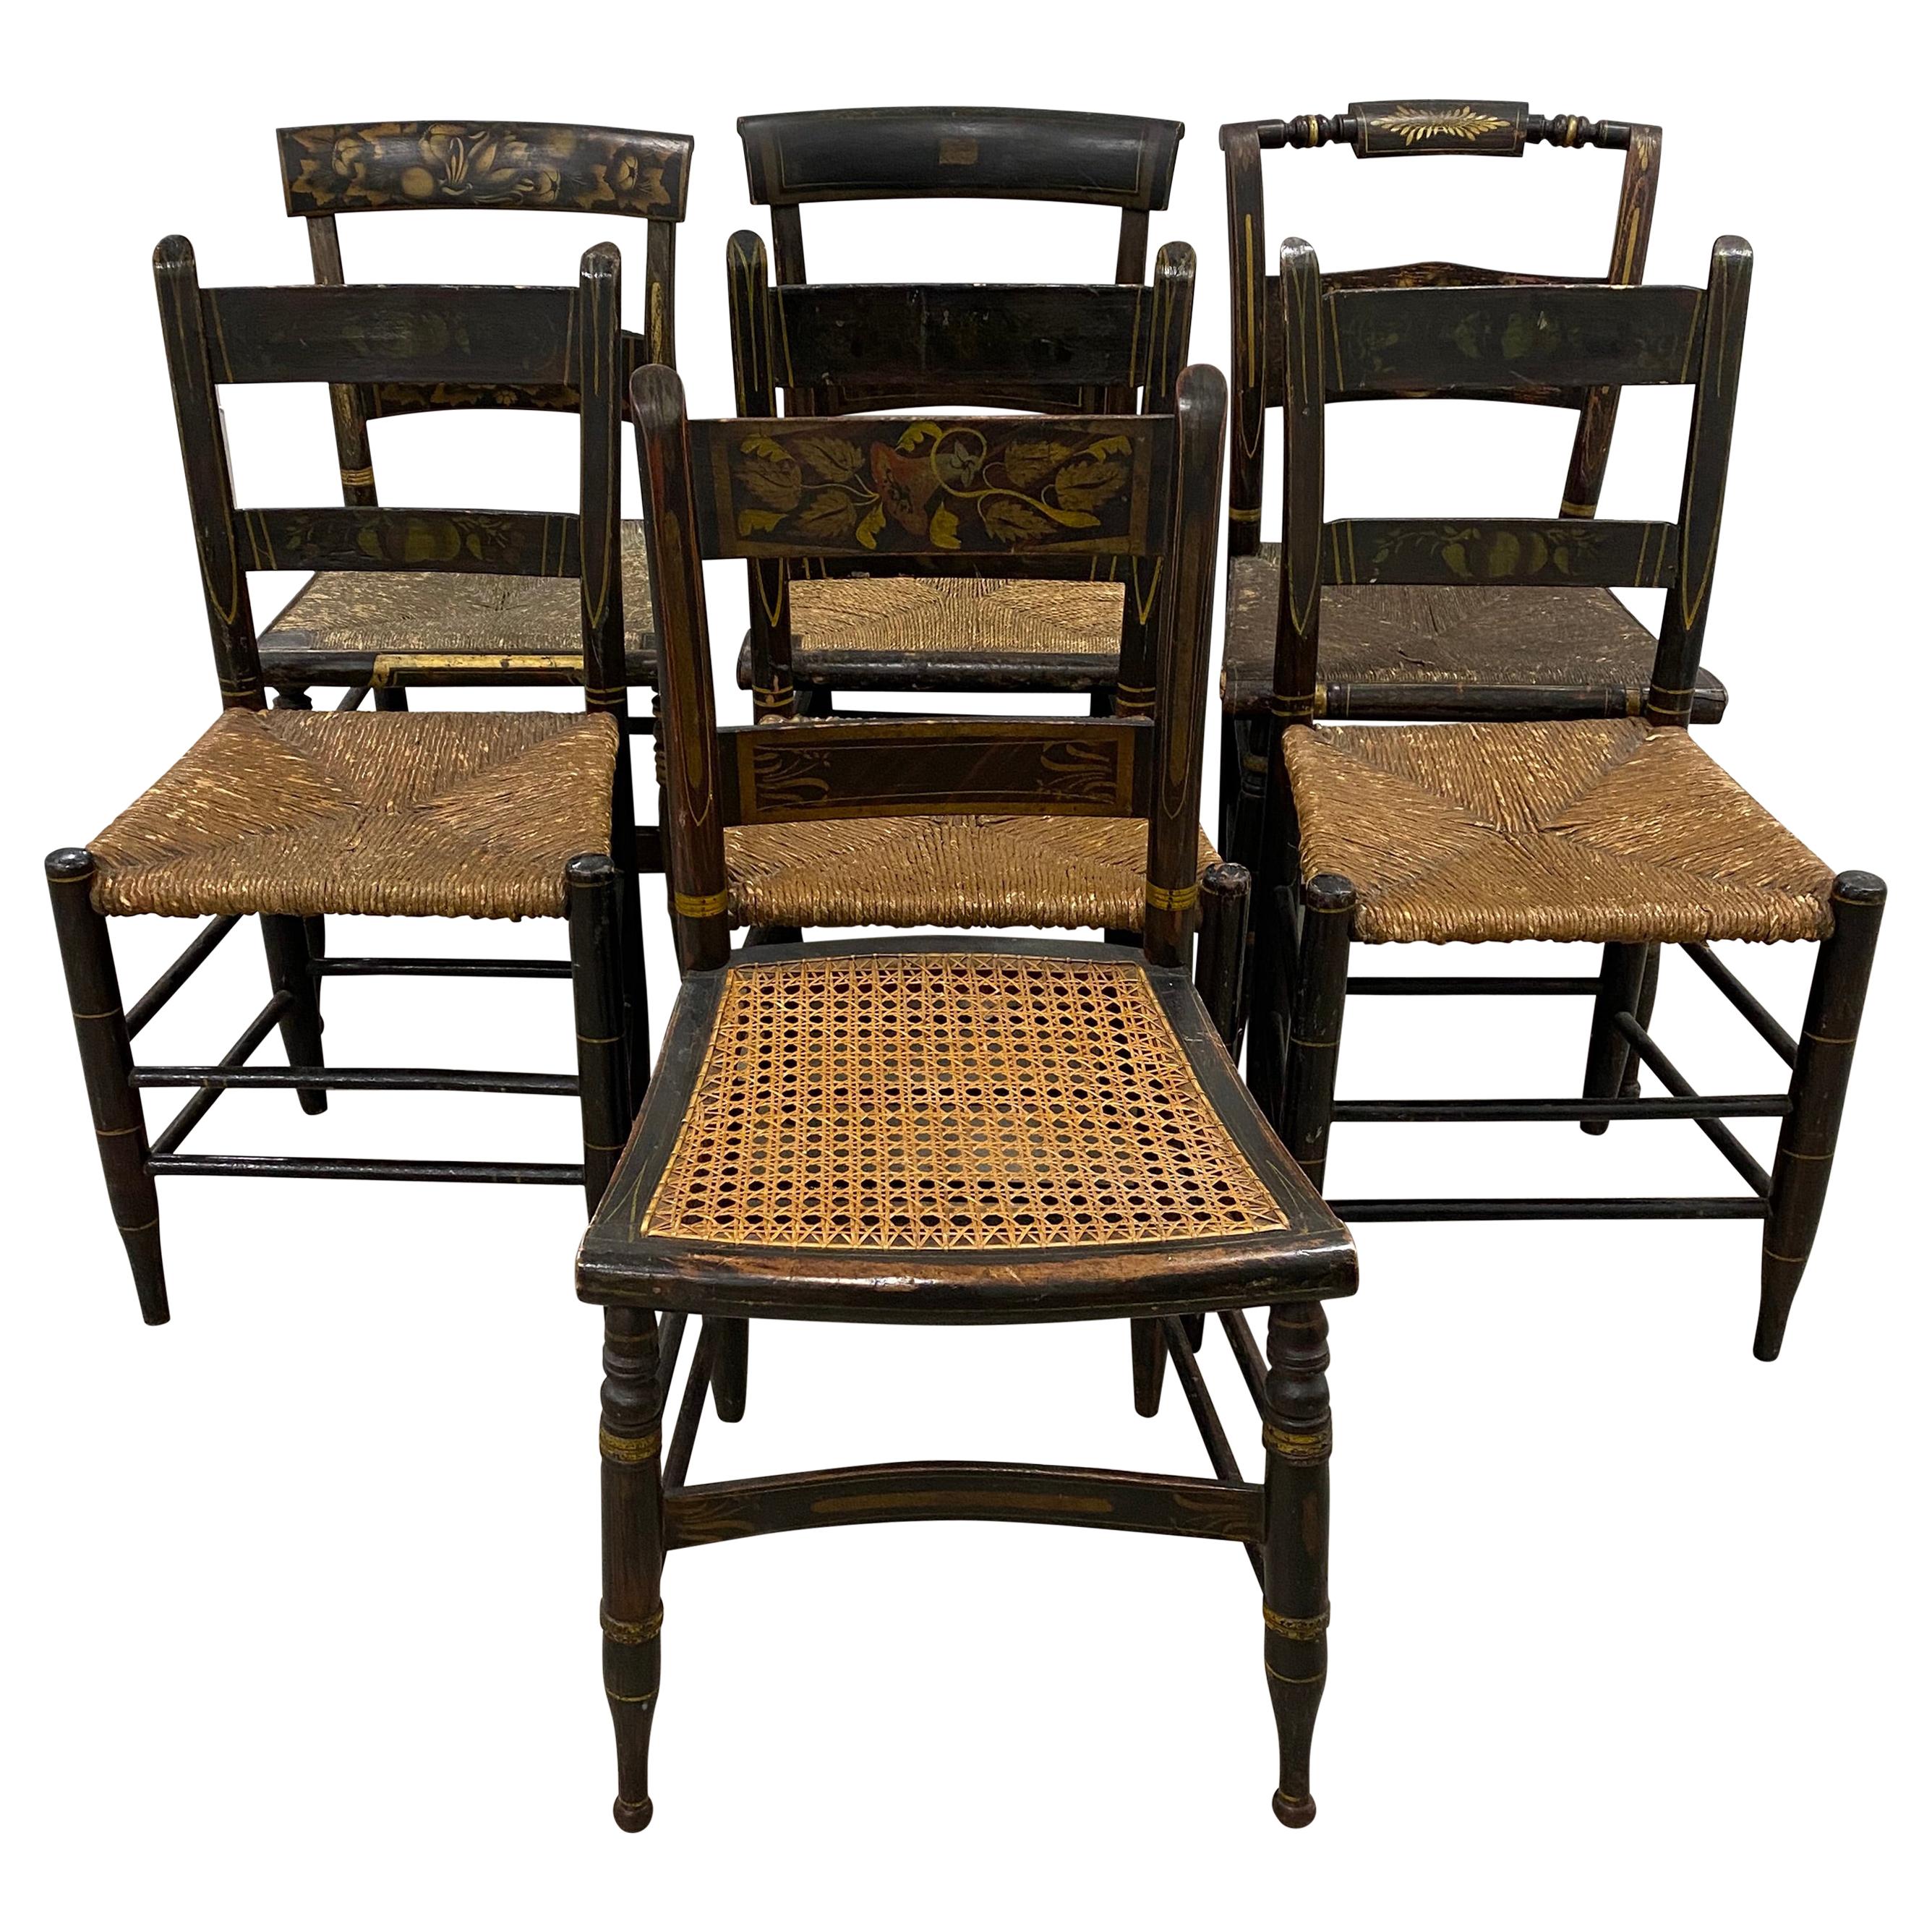 Lot of Six Mid-19th Century Mis-Matched American Hitchcock Side Chairs